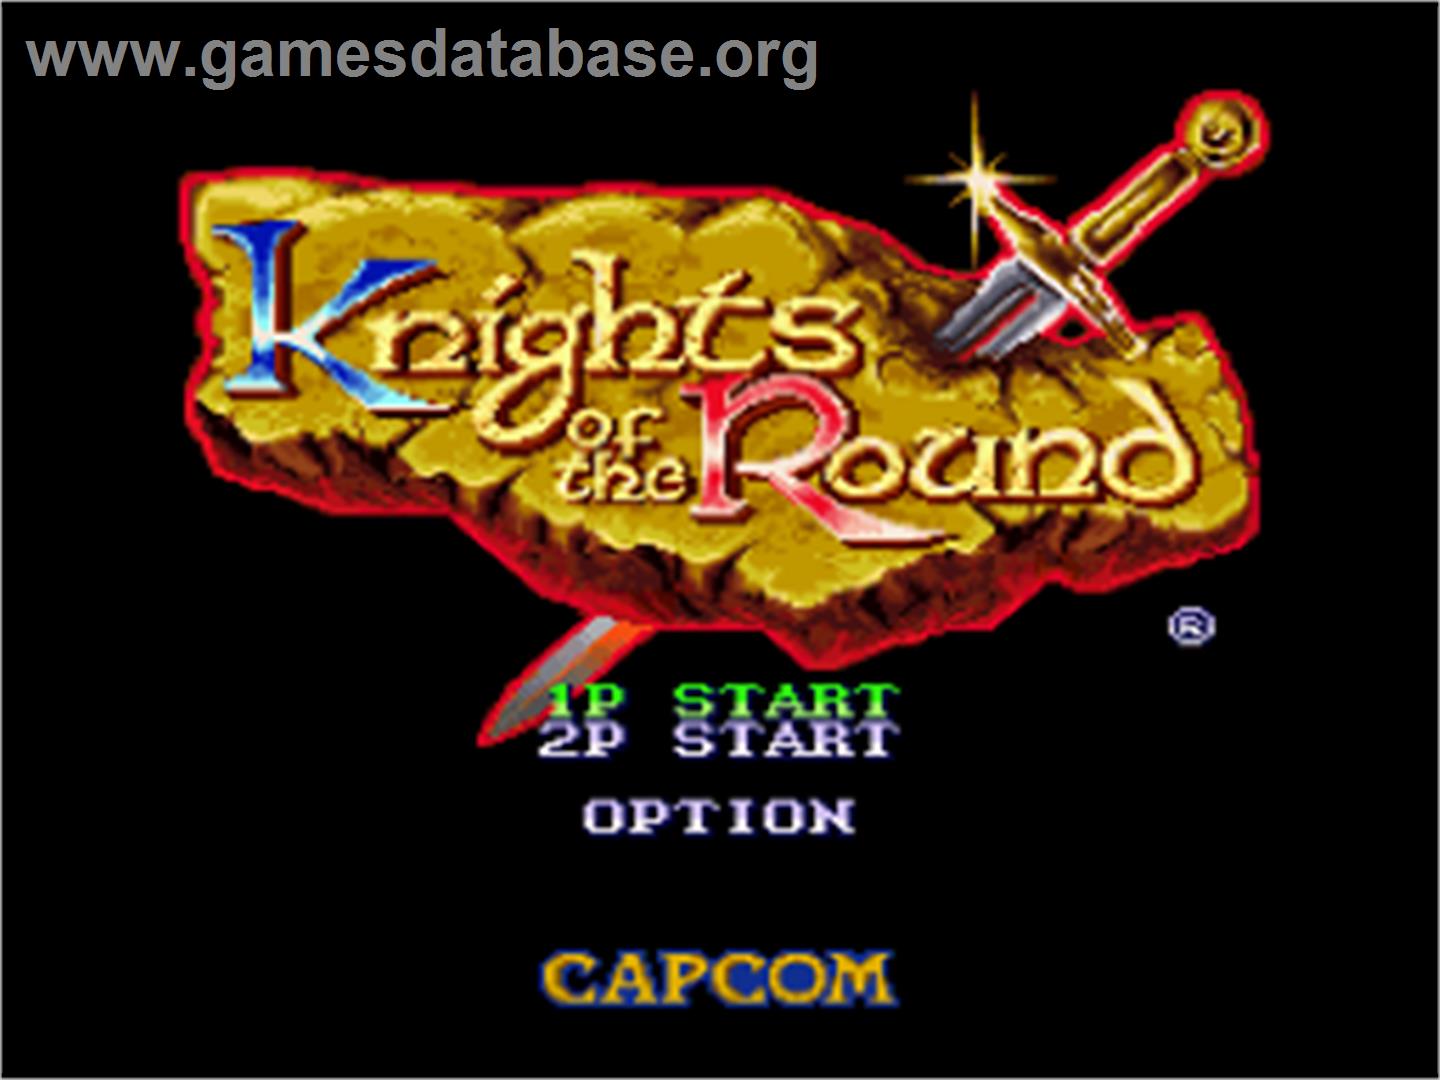 Knights of the Round - Nintendo SNES - Artwork - Title Screen